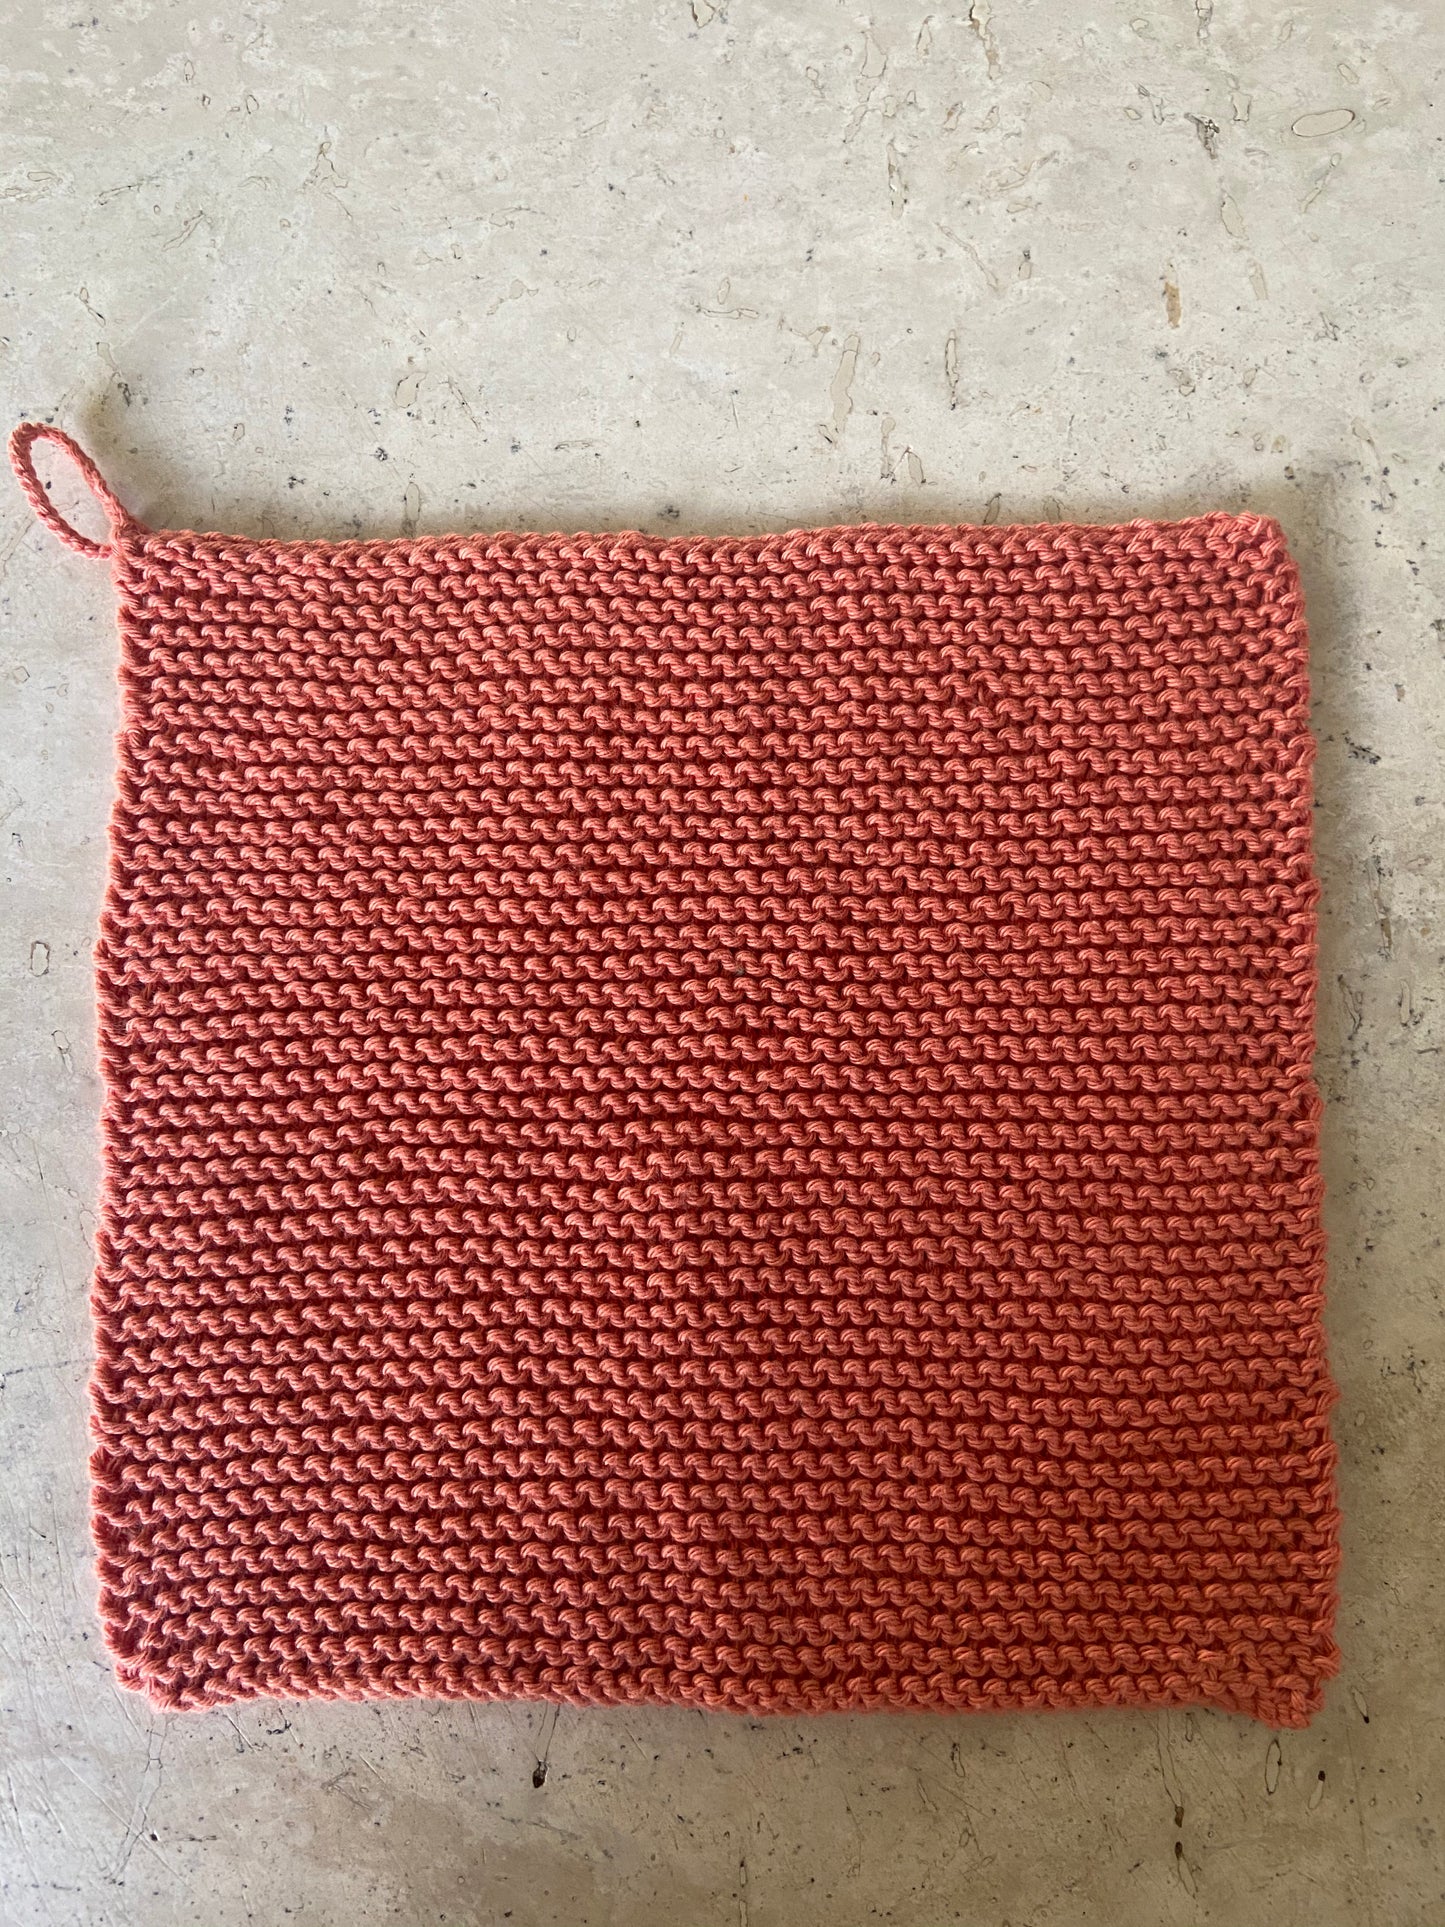 Hand Knitted Cotton Wash Cloths